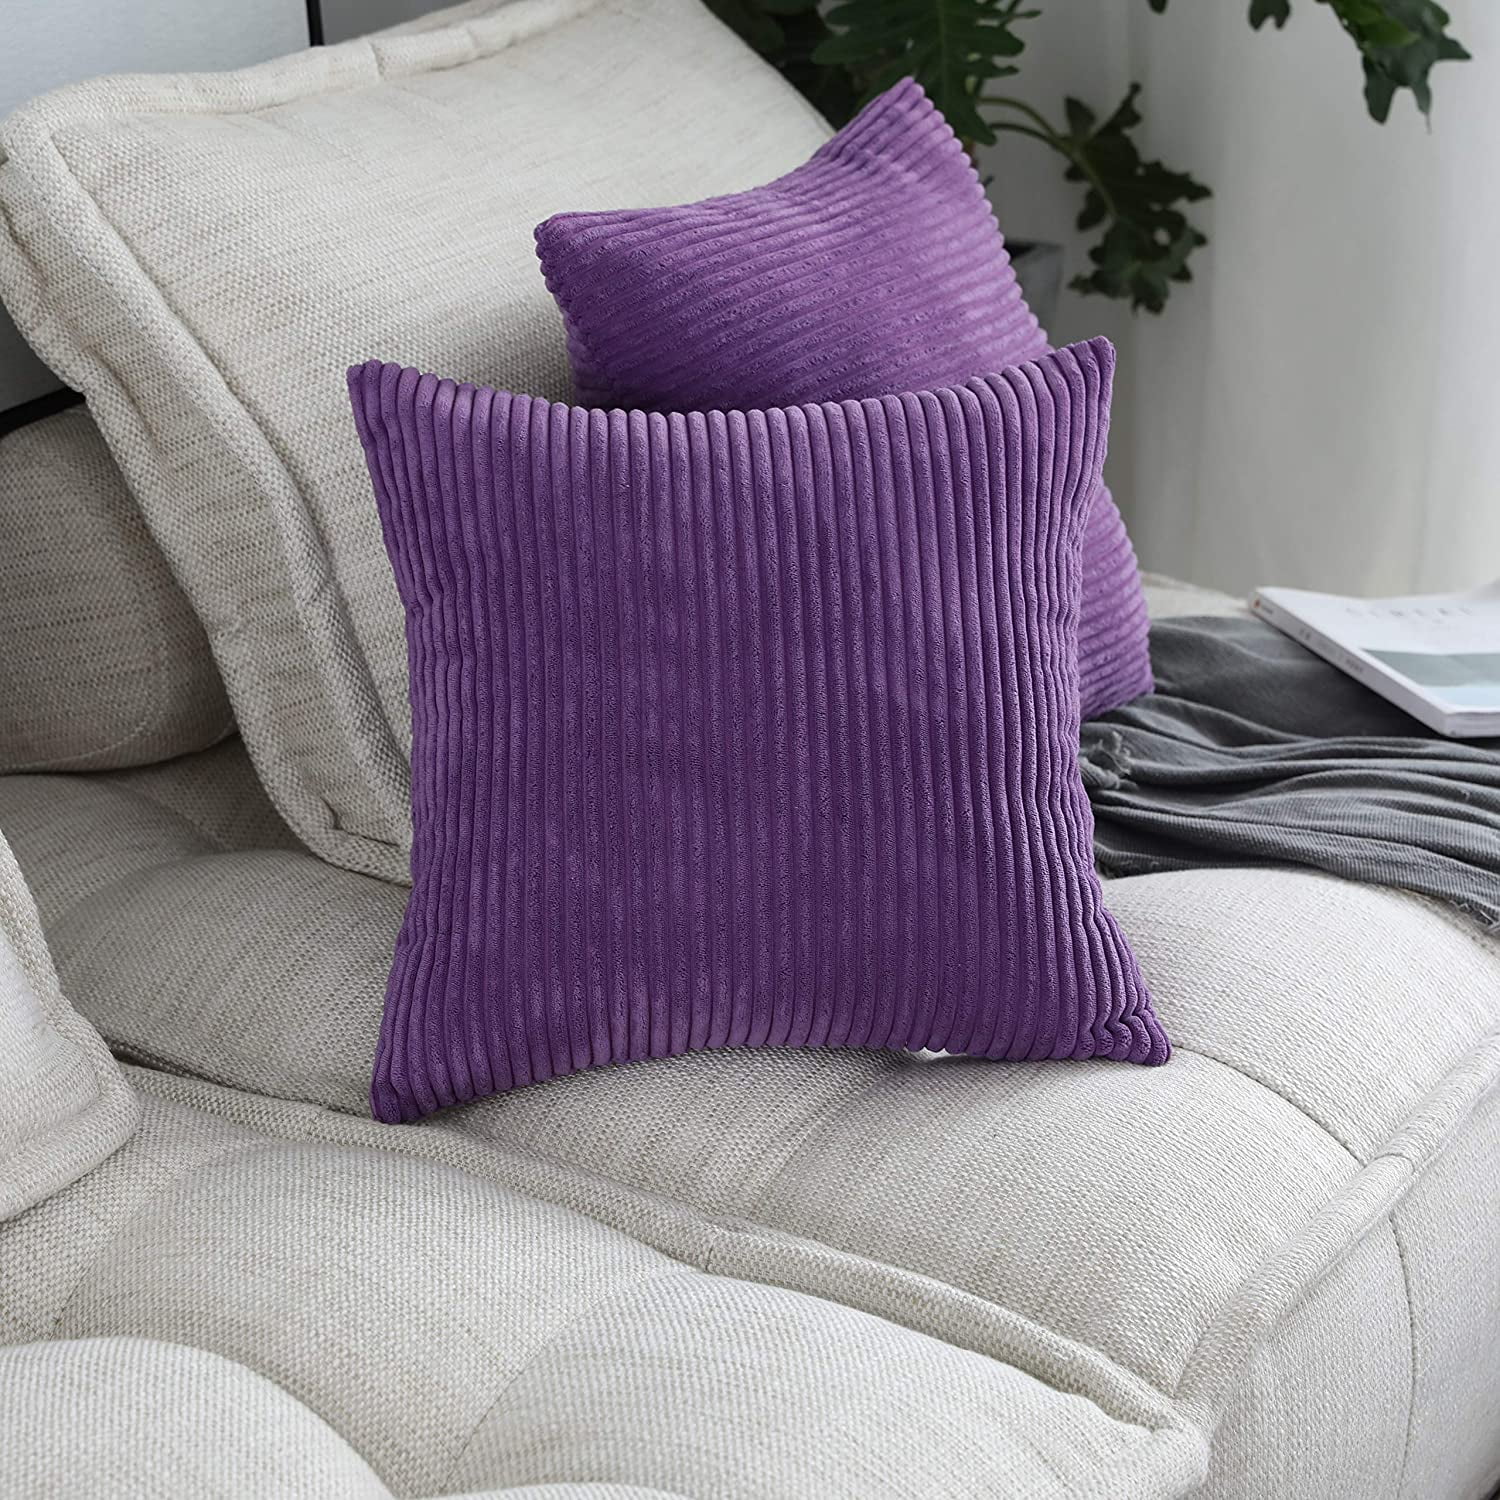 Twinkle Chenille Plum/ Lilac/ Aubergine Stripe Cushion Cover Come's In 2 Sizes 